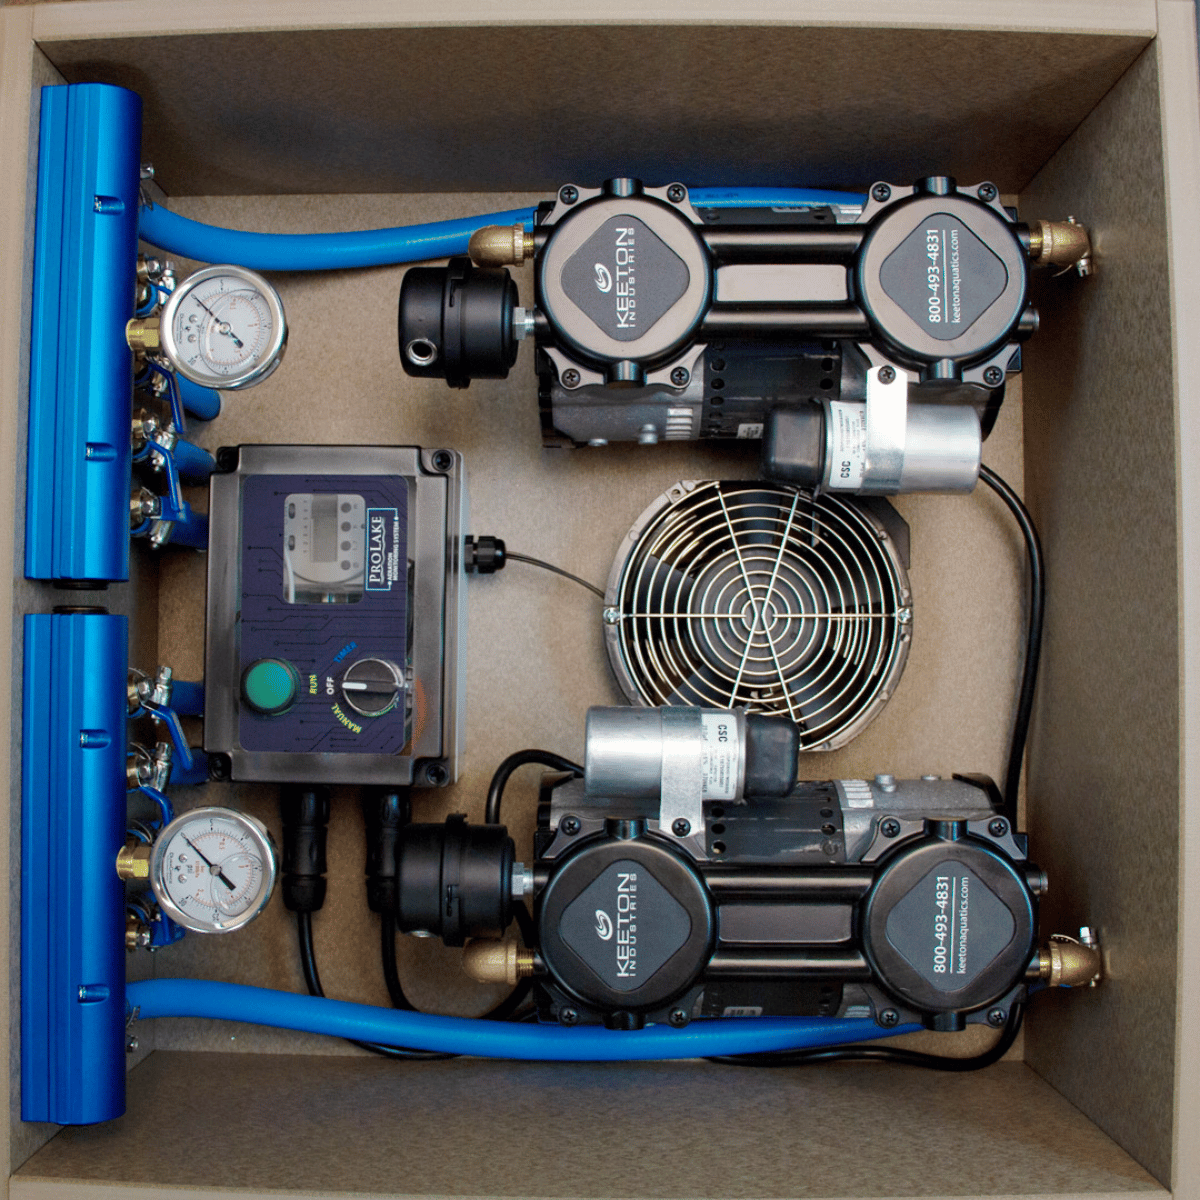 PROLAKE 2.5 Aeration System - Cabinet Internal View with the Compressor